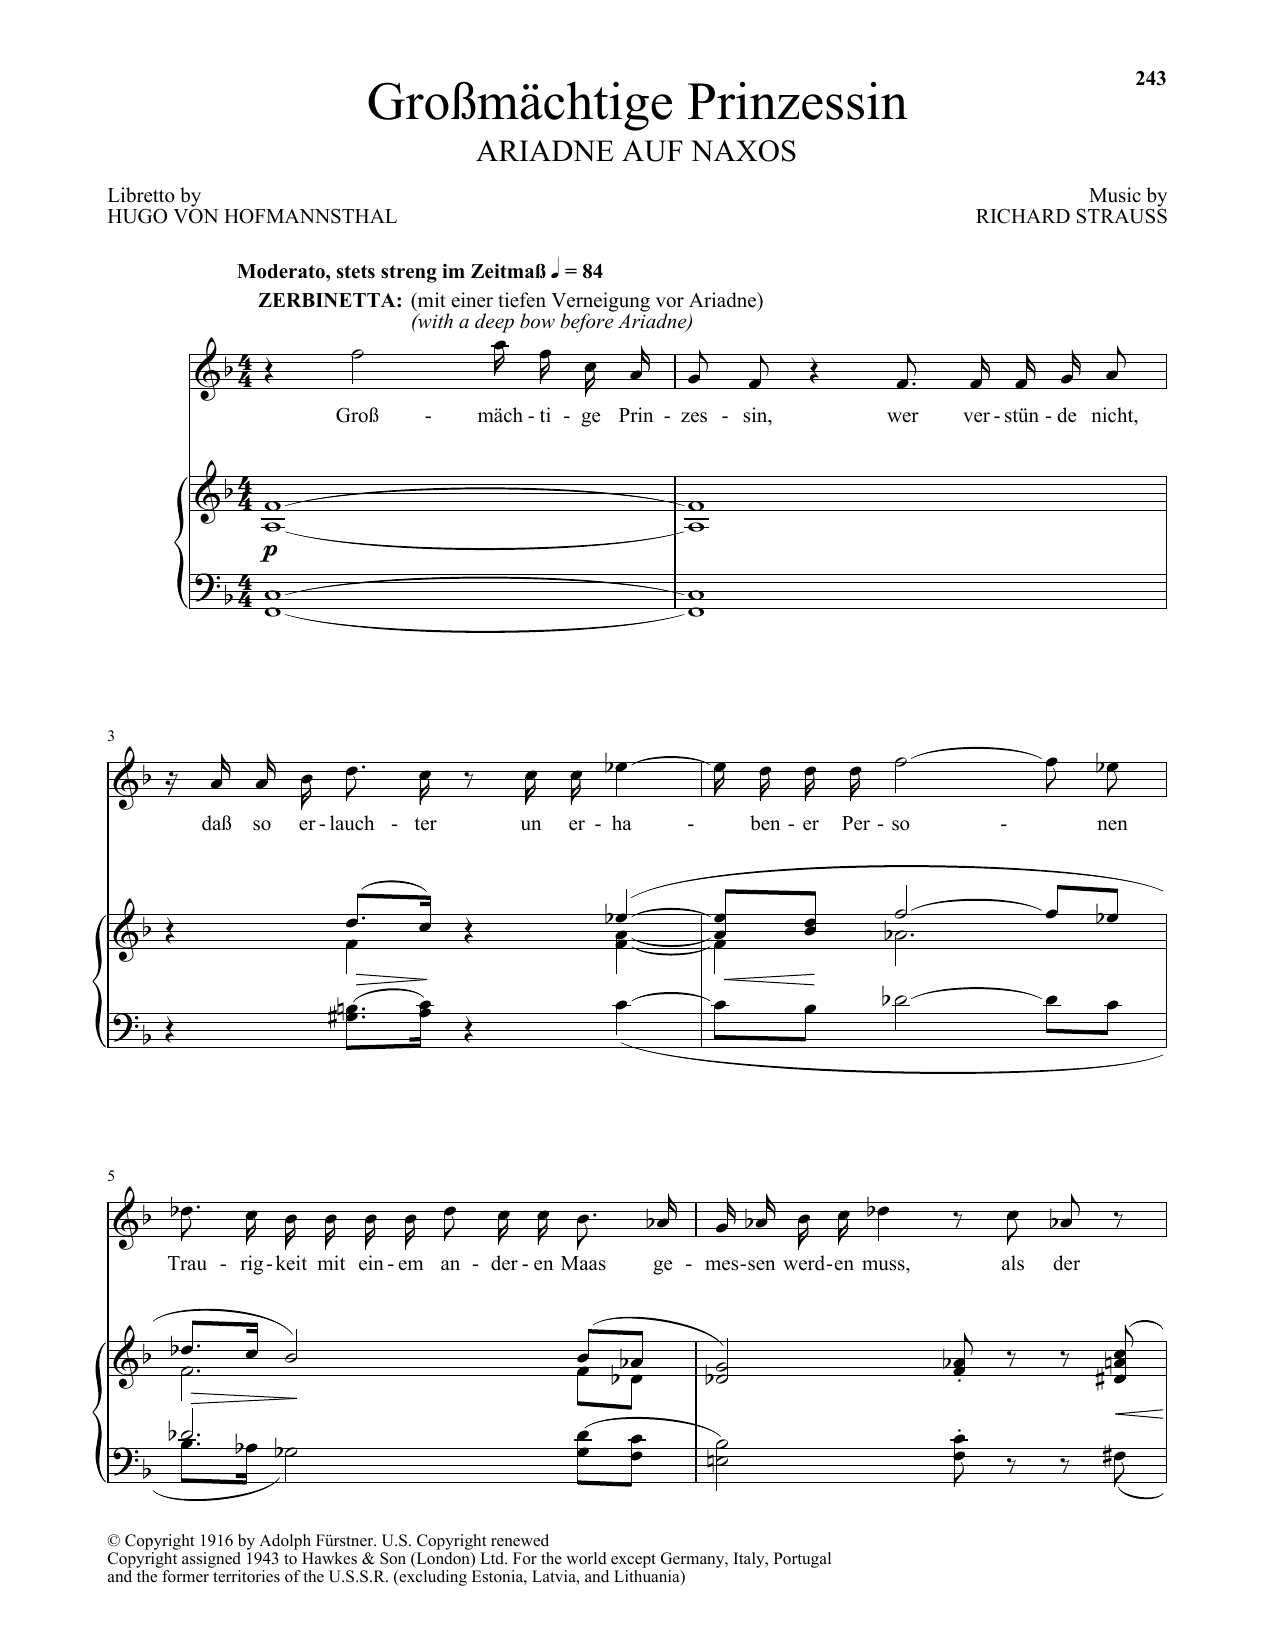 Richard Strauss Grossmatige Prinzessin (from Ariadne auf Naxos) sheet music preview music notes and score for Piano & Vocal including 21 page(s)